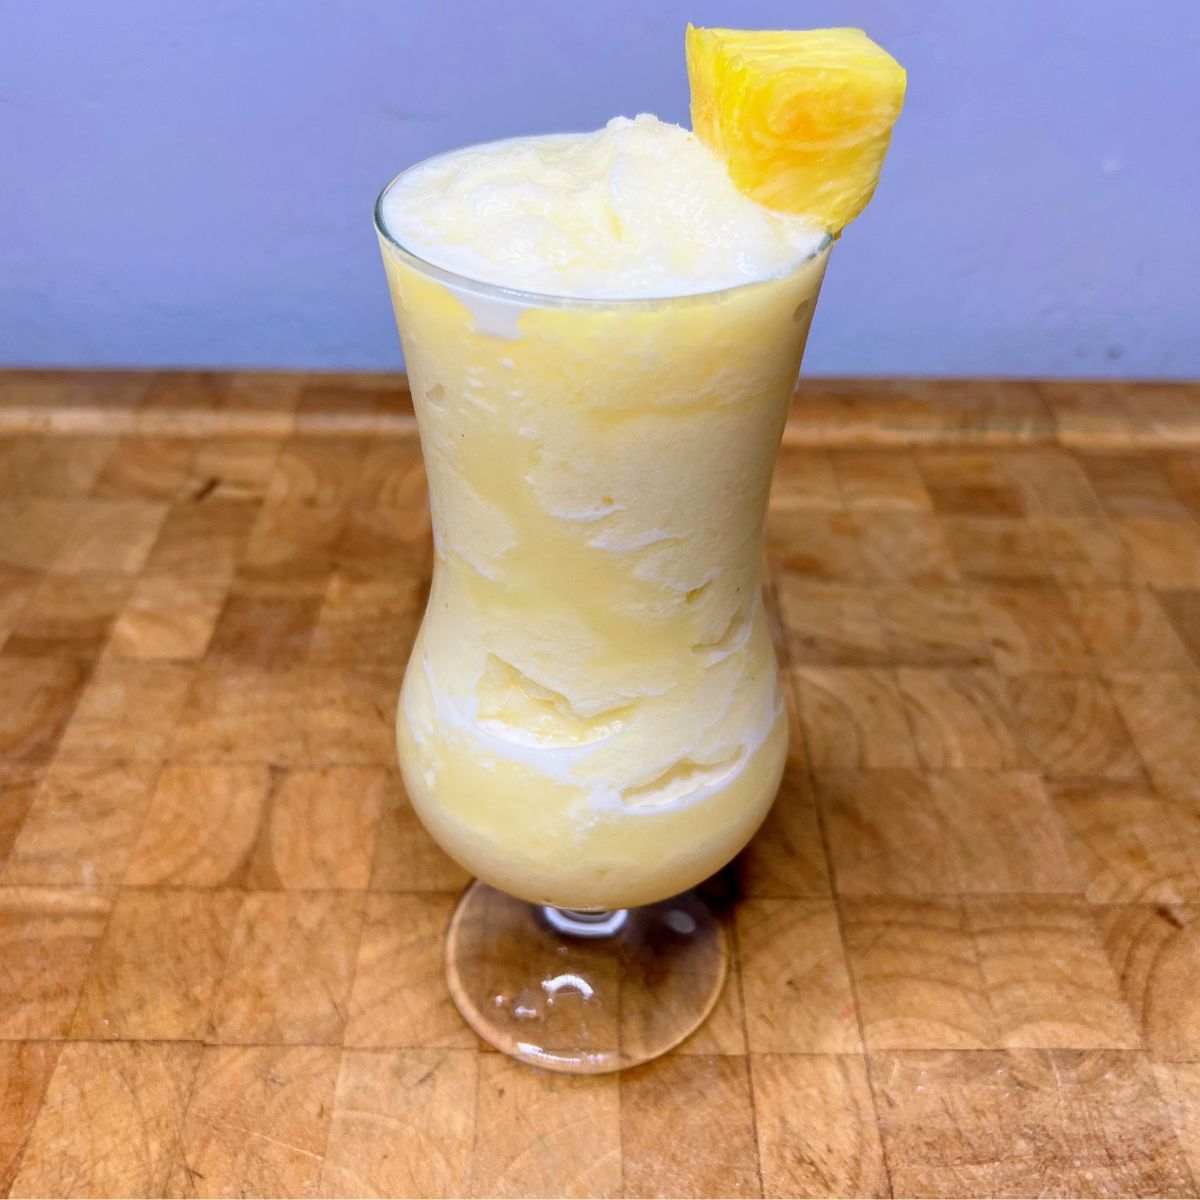 Virgin pina colada in a hurricane glass with slice of pineapple on the rim.